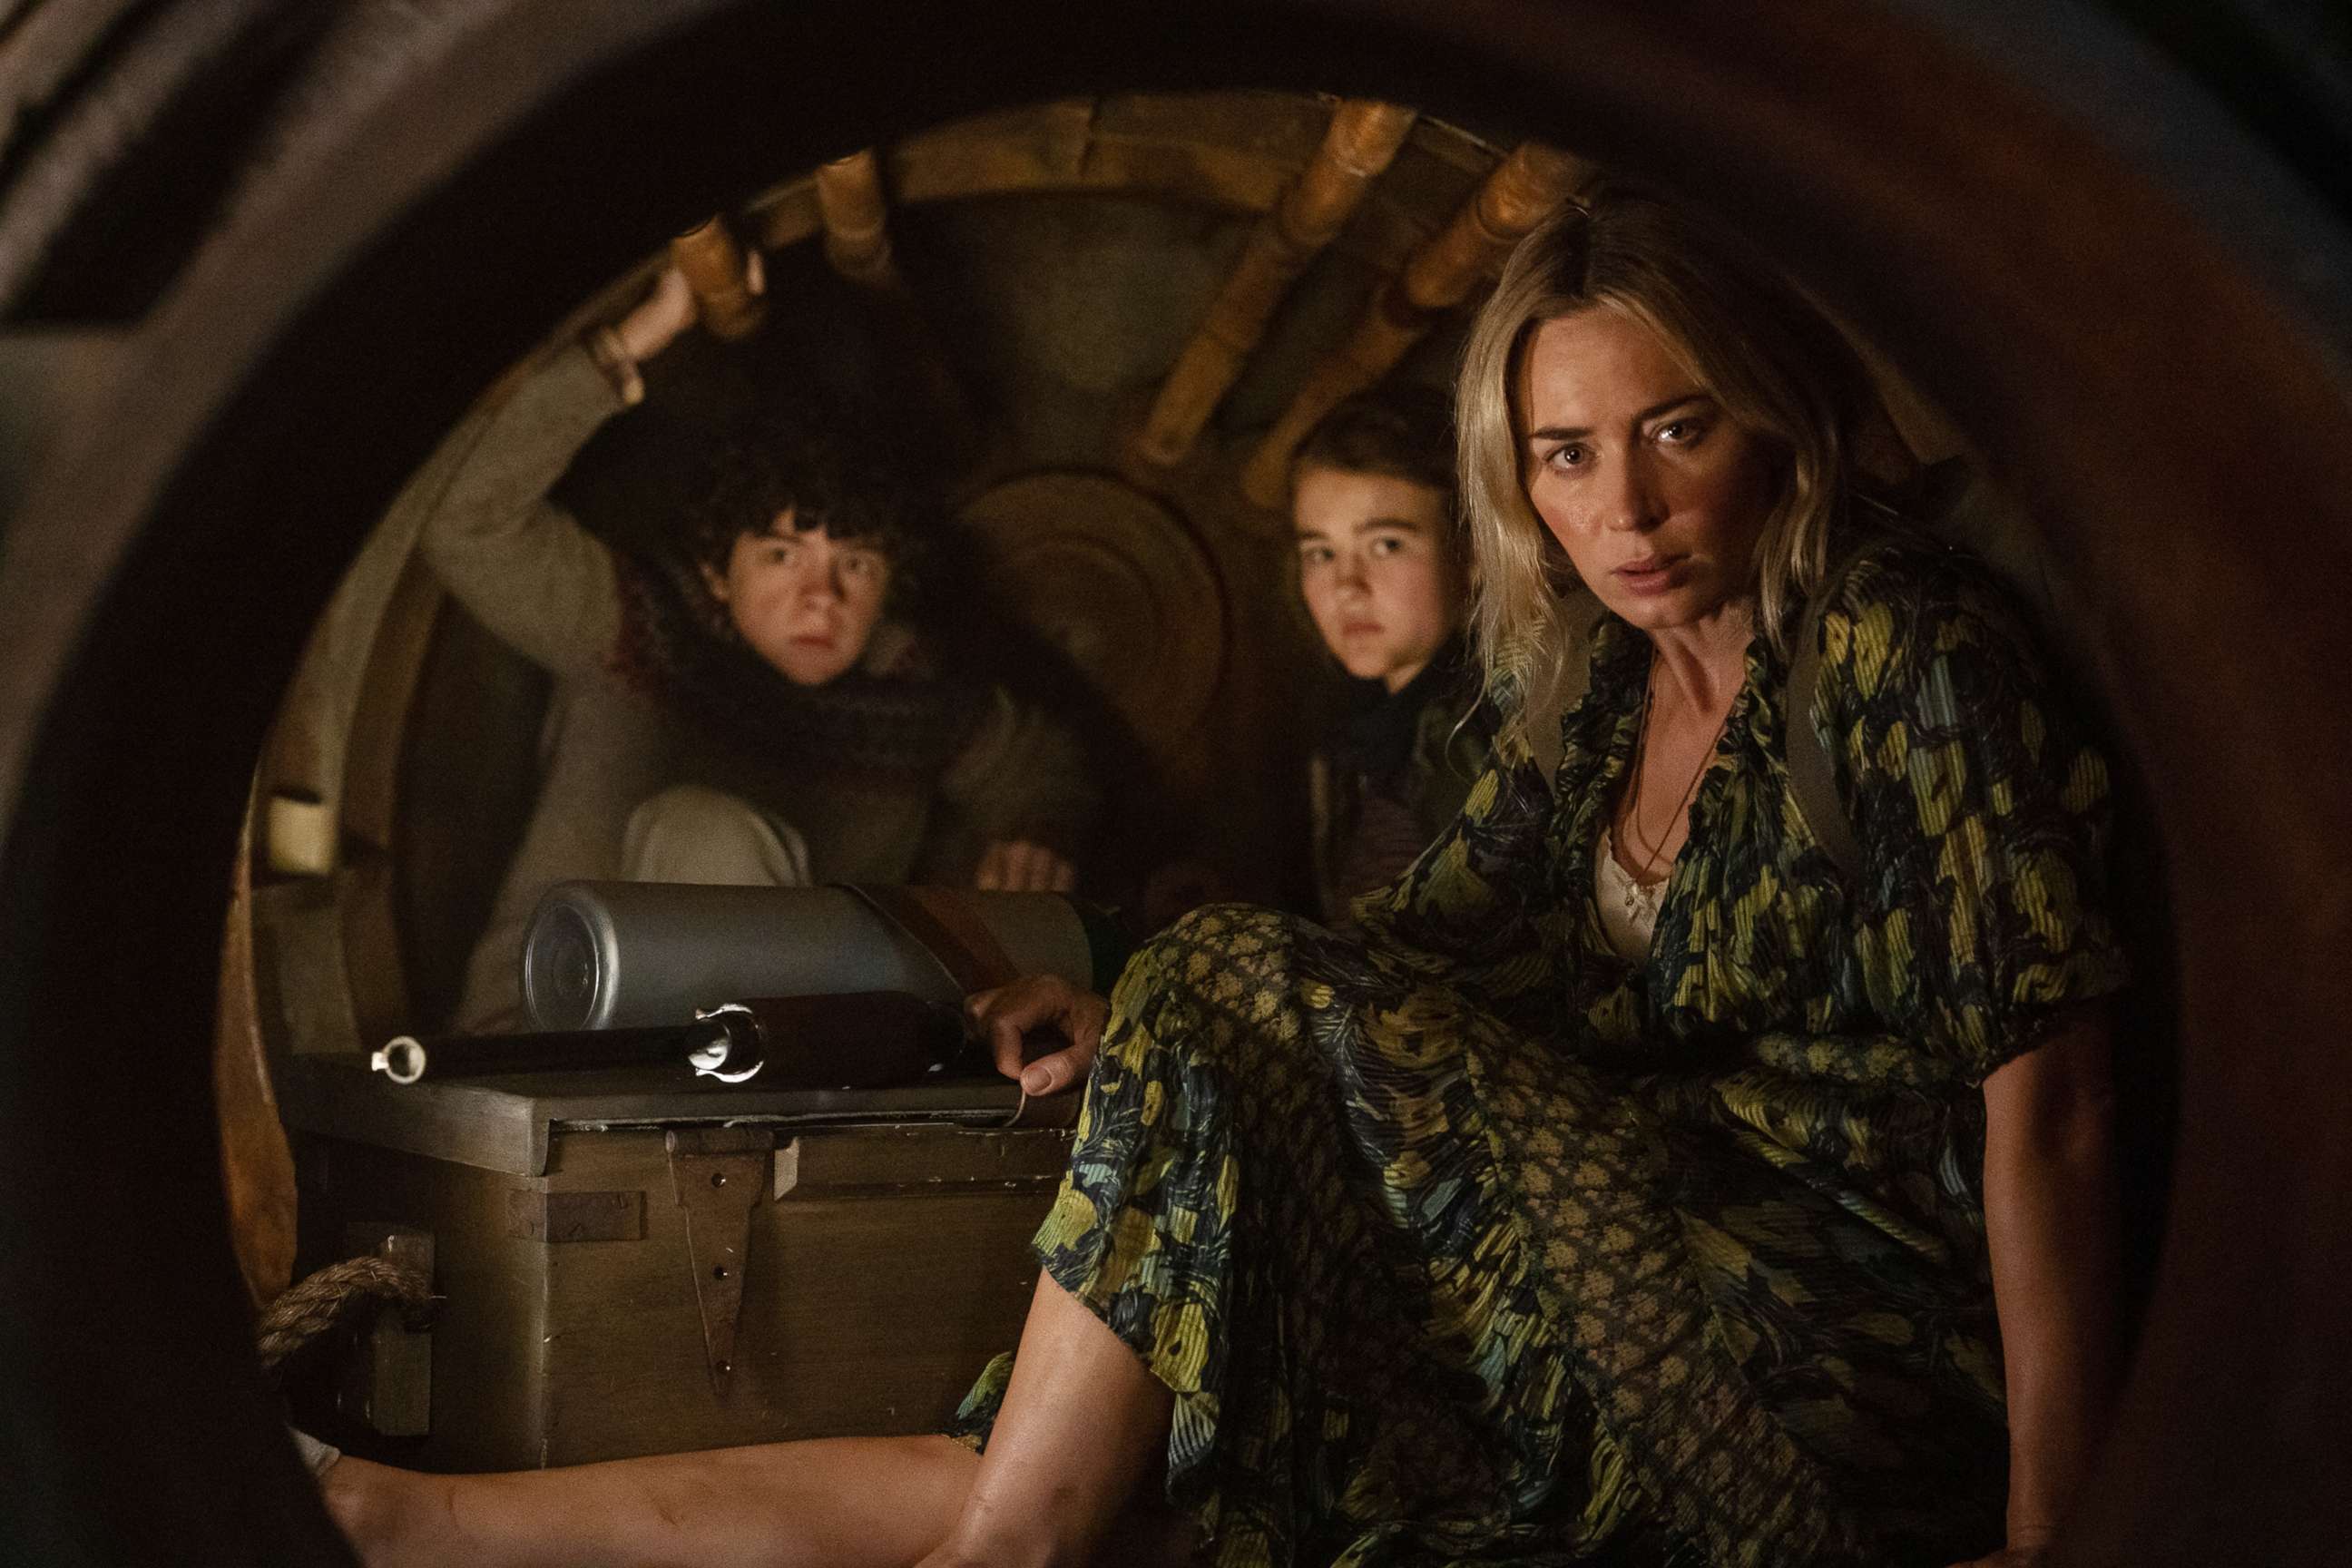 PHOTO: Noah Jupe as Marcus, Millicent Simmonds as Regan, and Emily Blunt as Evelyn in a scene from "A Quiet Place Part II."